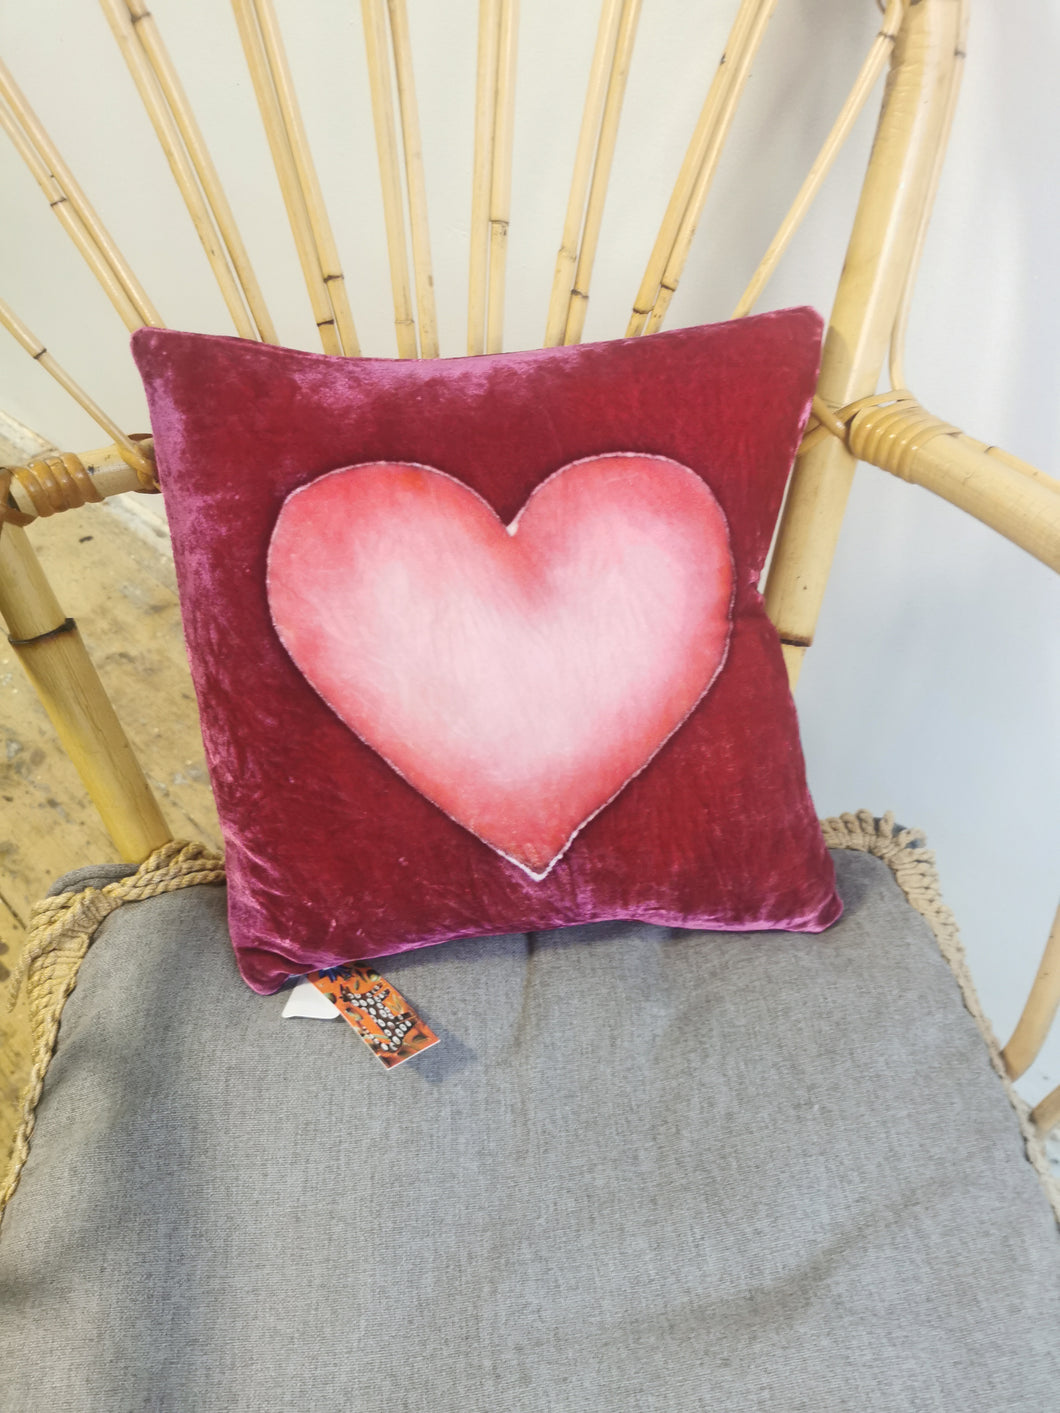 Hand-painted velvet cushions, HEART pink on red/pink background.